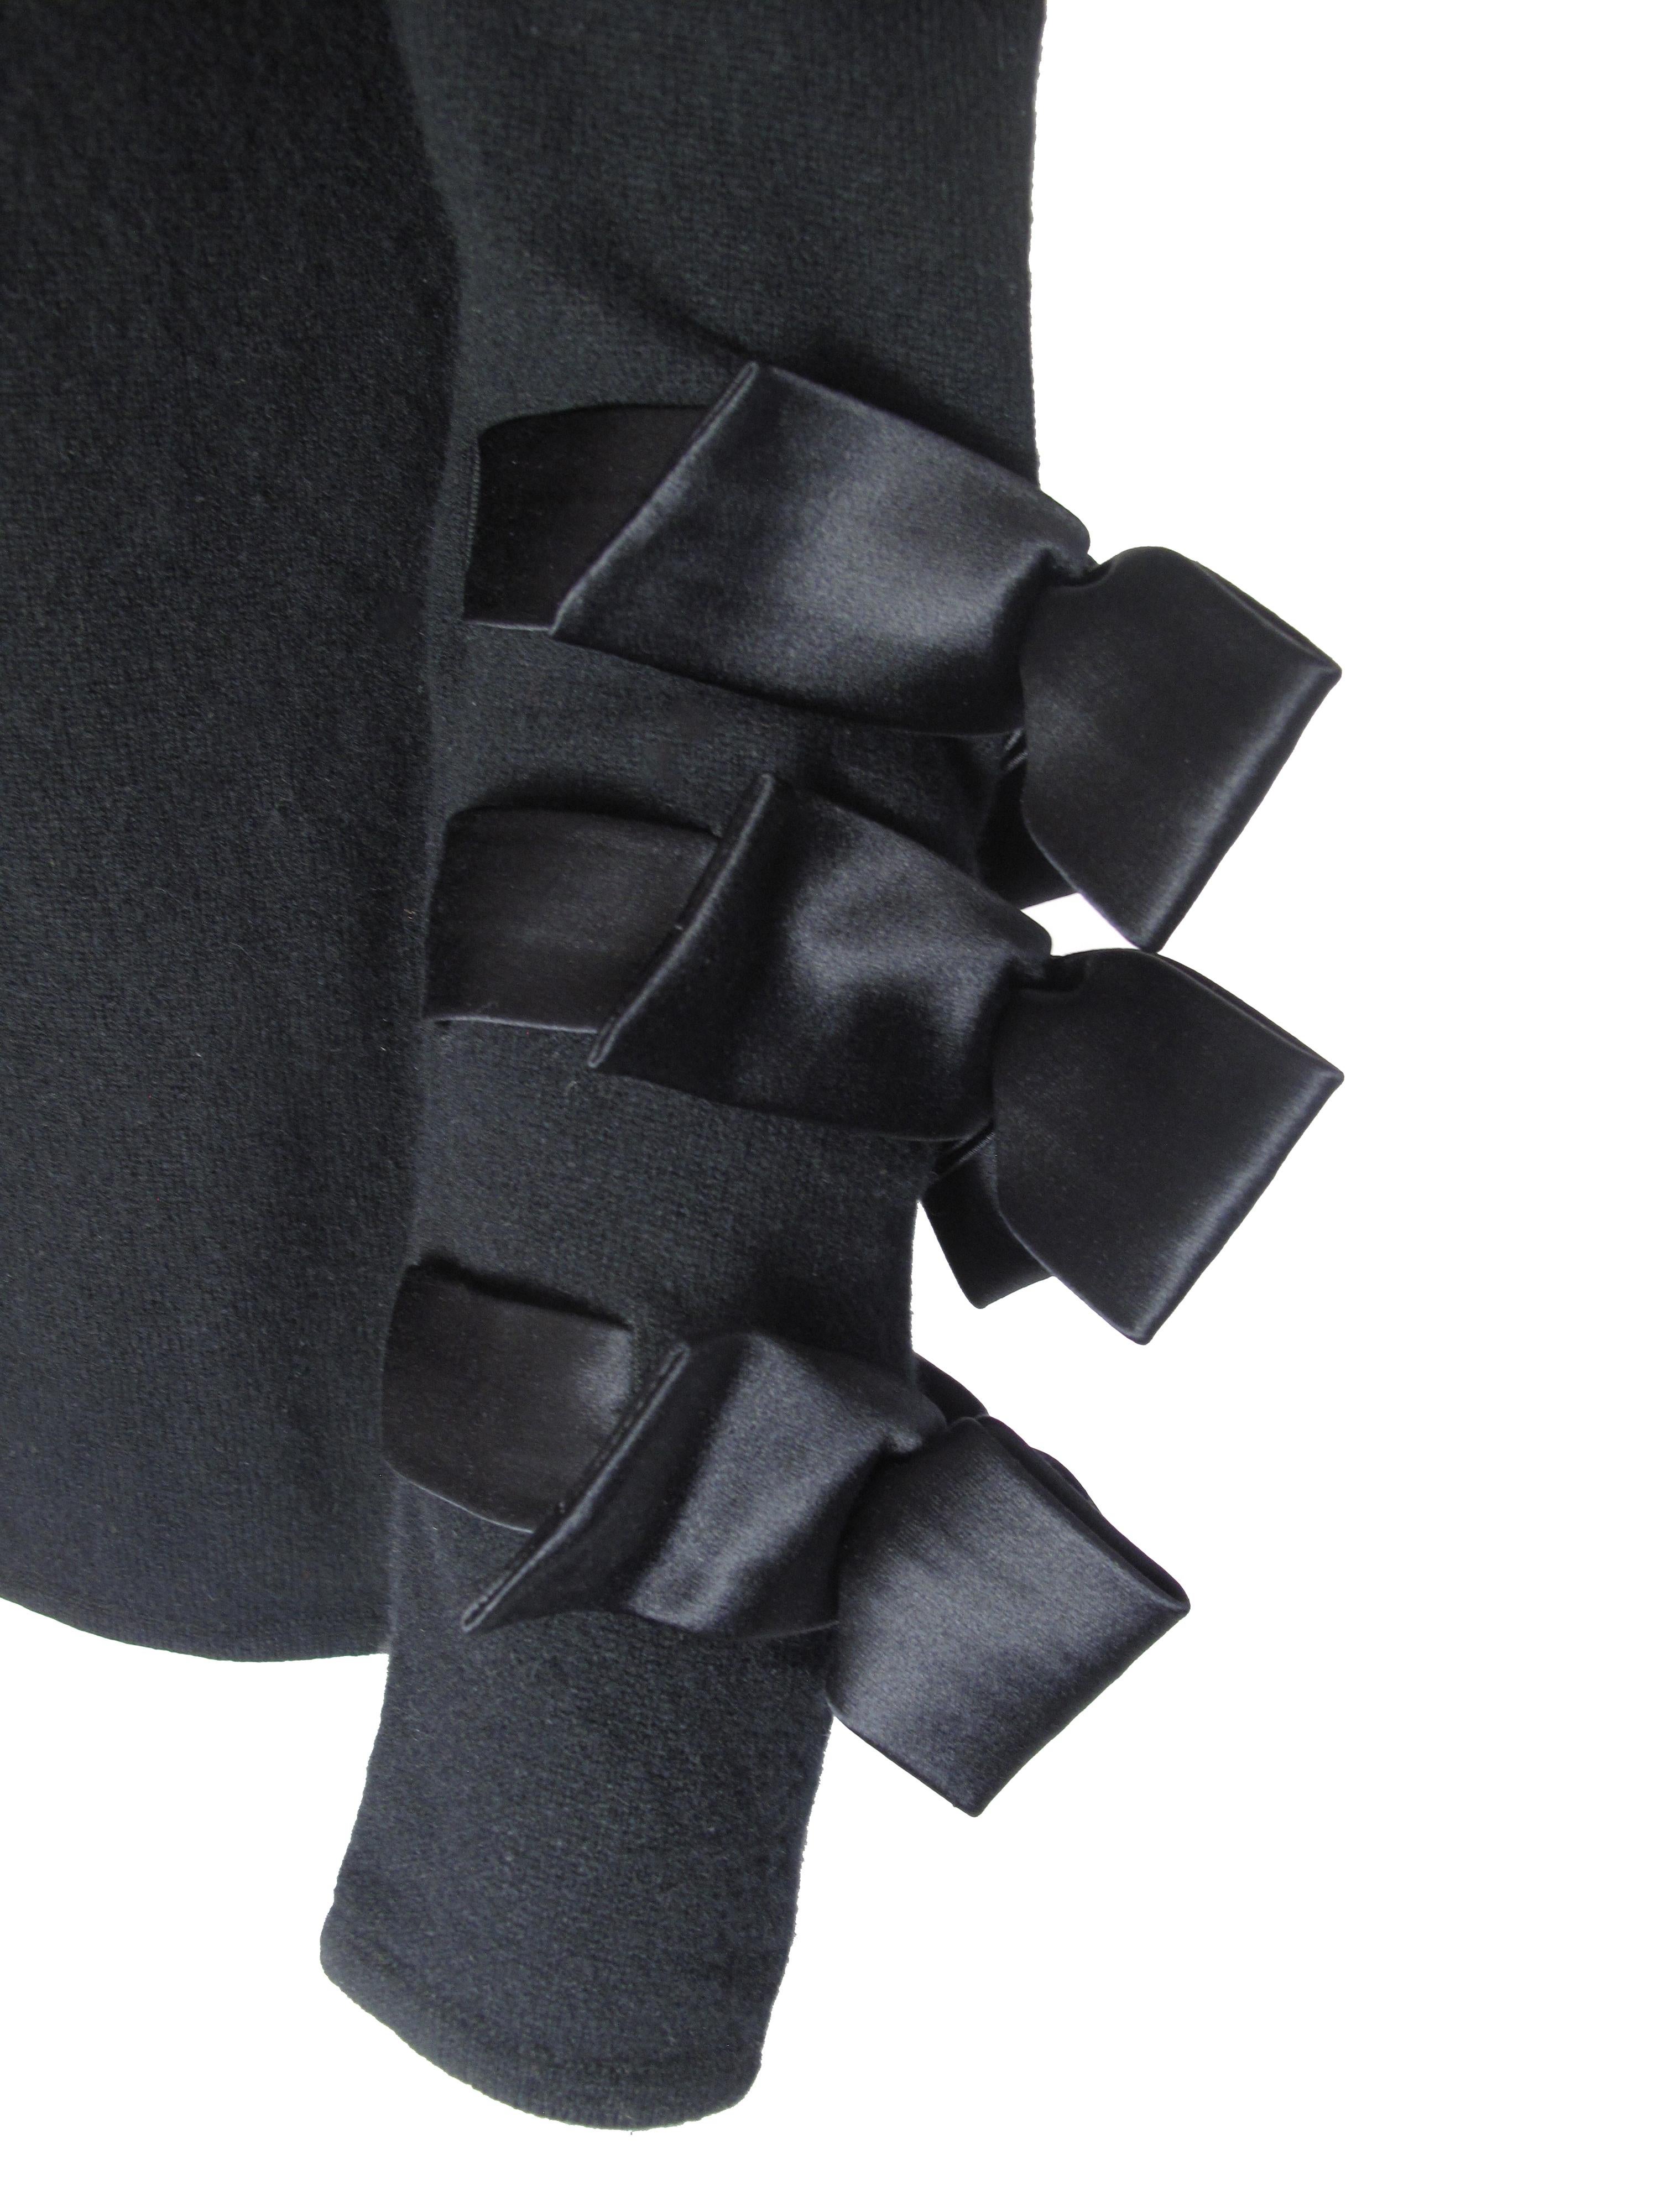 Valentino black sweater with ribbon bow detail on sleeve. Condition: Very good. Size M